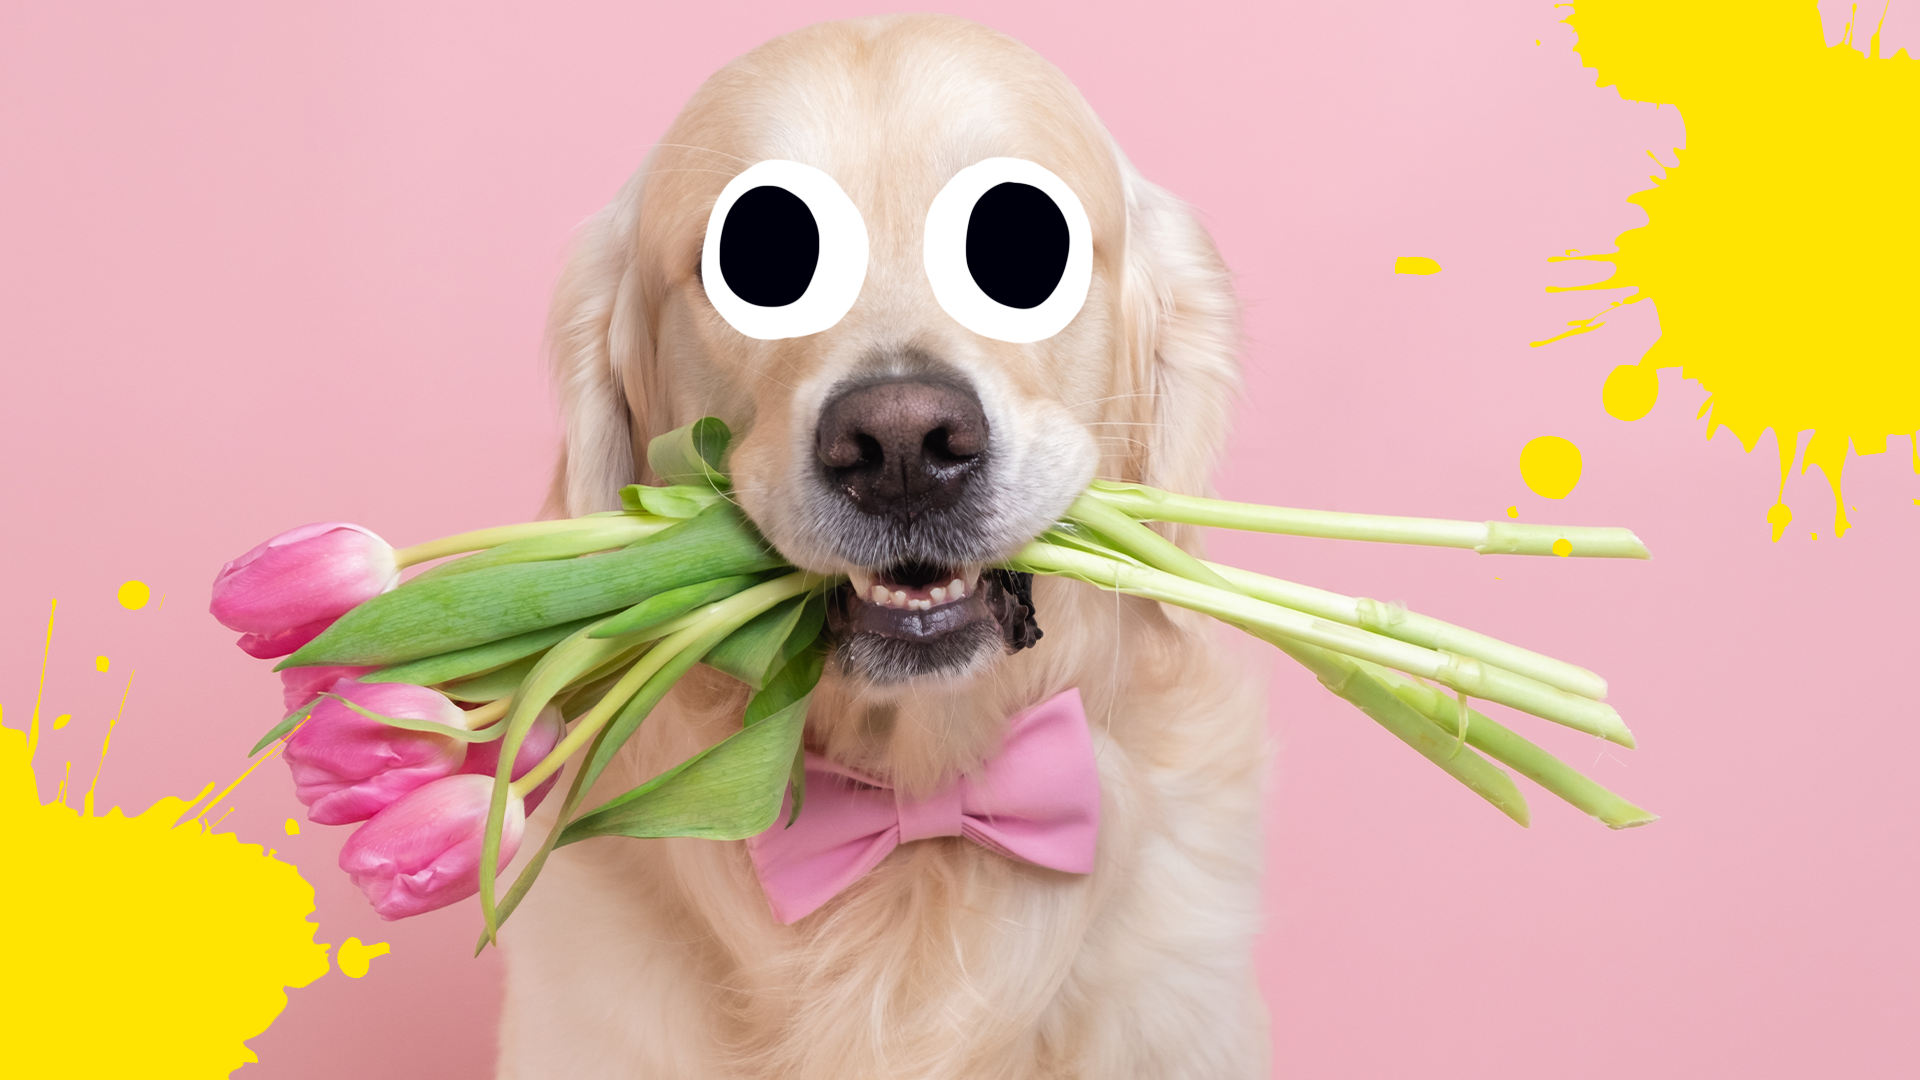 Dog with tulips in its mouth with splats